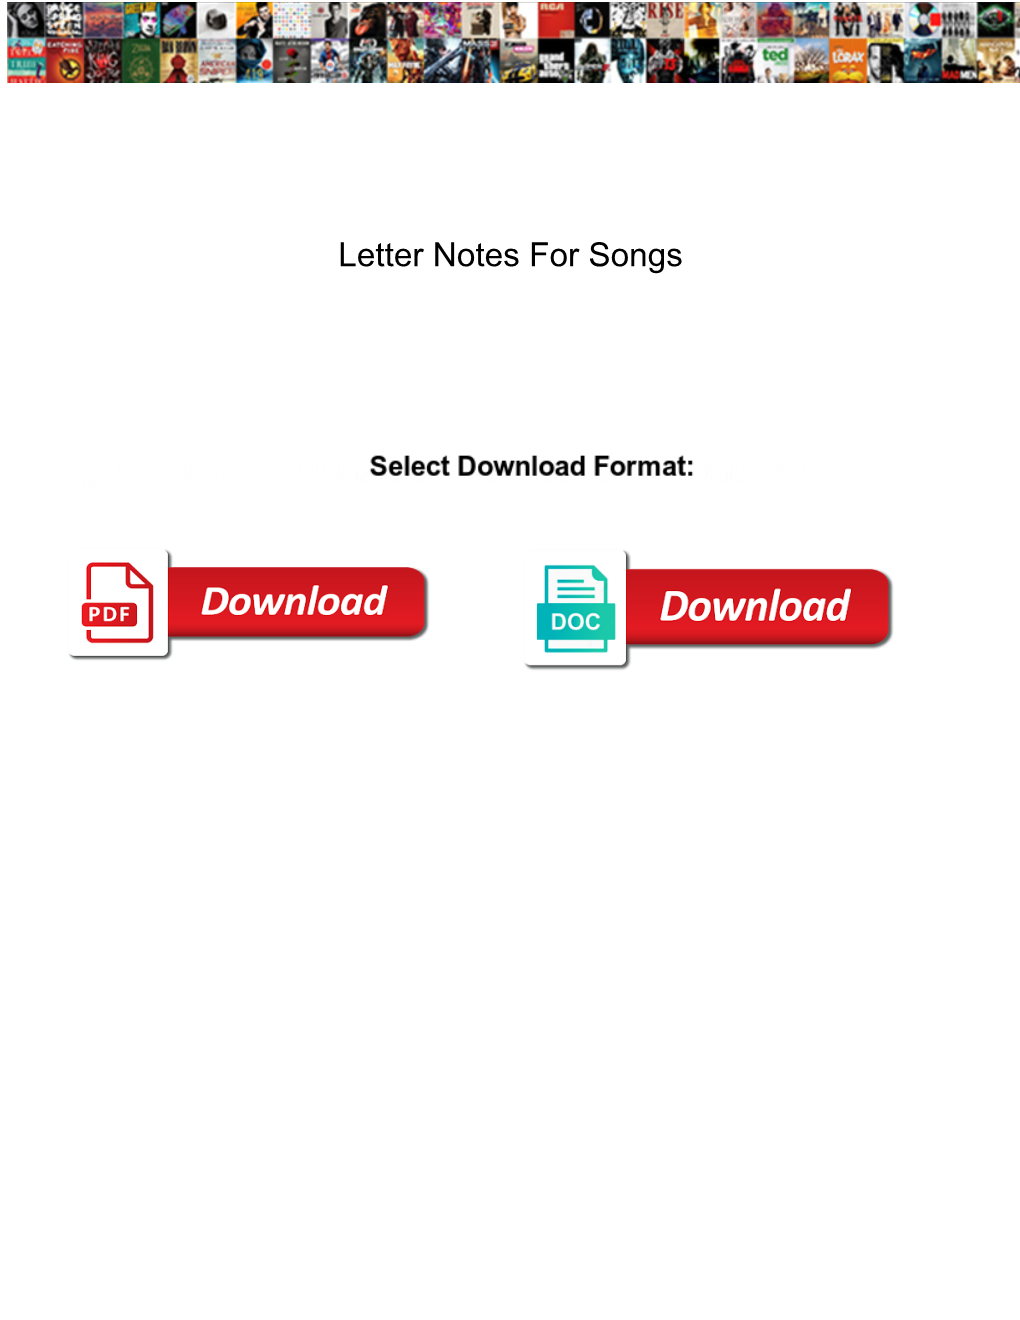 Letter Notes for Songs